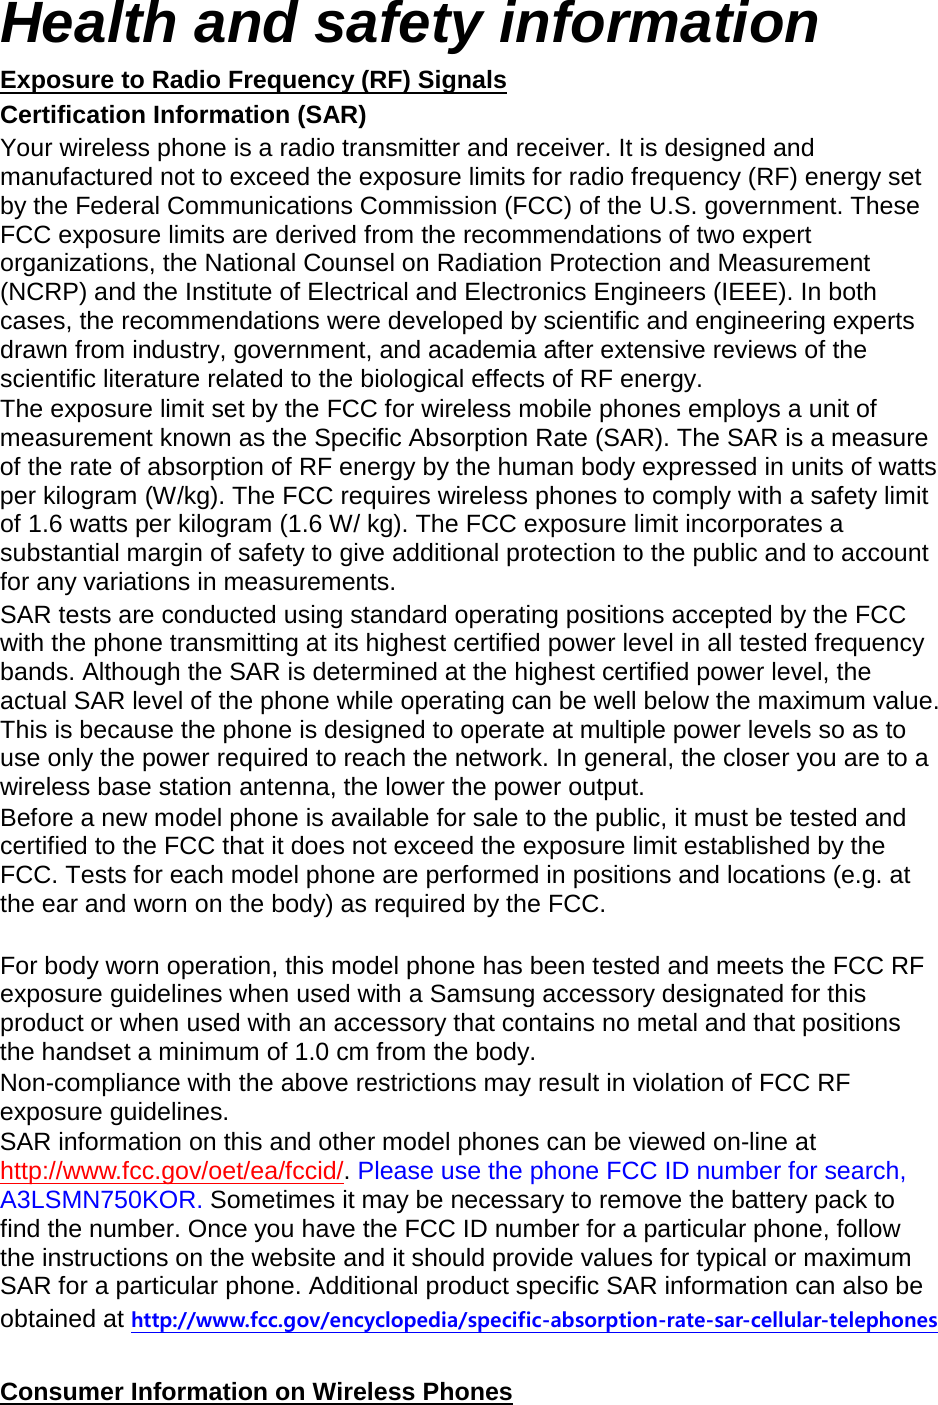 Health and safety information Exposure to Radio Frequency (RF) Signals Certification Information (SAR) Your wireless phone is a radio transmitter and receiver. It is designed and manufactured not to exceed the exposure limits for radio frequency (RF) energy set by the Federal Communications Commission (FCC) of the U.S. government. These FCC exposure limits are derived from the recommendations of two expert organizations, the National Counsel on Radiation Protection and Measurement (NCRP) and the Institute of Electrical and Electronics Engineers (IEEE). In both cases, the recommendations were developed by scientific and engineering experts drawn from industry, government, and academia after extensive reviews of the scientific literature related to the biological effects of RF energy. The exposure limit set by the FCC for wireless mobile phones employs a unit of measurement known as the Specific Absorption Rate (SAR). The SAR is a measure of the rate of absorption of RF energy by the human body expressed in units of watts per kilogram (W/kg). The FCC requires wireless phones to comply with a safety limit of 1.6 watts per kilogram (1.6 W/ kg). The FCC exposure limit incorporates a substantial margin of safety to give additional protection to the public and to account for any variations in measurements. SAR tests are conducted using standard operating positions accepted by the FCC with the phone transmitting at its highest certified power level in all tested frequency bands. Although the SAR is determined at the highest certified power level, the actual SAR level of the phone while operating can be well below the maximum value. This is because the phone is designed to operate at multiple power levels so as to use only the power required to reach the network. In general, the closer you are to a wireless base station antenna, the lower the power output. Before a new model phone is available for sale to the public, it must be tested and certified to the FCC that it does not exceed the exposure limit established by the FCC. Tests for each model phone are performed in positions and locations (e.g. at the ear and worn on the body) as required by the FCC.      For body worn operation, this model phone has been tested and meets the FCC RF exposure guidelines when used with a Samsung accessory designated for this product or when used with an accessory that contains no metal and that positions the handset a minimum of 1.0 cm from the body.   Non-compliance with the above restrictions may result in violation of FCC RF exposure guidelines. SAR information on this and other model phones can be viewed on-line at http://www.fcc.gov/oet/ea/fccid/. Please use the phone FCC ID number for search, A3LSMN750KOR. Sometimes it may be necessary to remove the battery pack to find the number. Once you have the FCC ID number for a particular phone, follow the instructions on the website and it should provide values for typical or maximum SAR for a particular phone. Additional product specific SAR information can also be obtained at http://www.fcc.gov/encyclopedia/specific-absorption-rate-sar-cellular-telephones  Consumer Information on Wireless Phones 